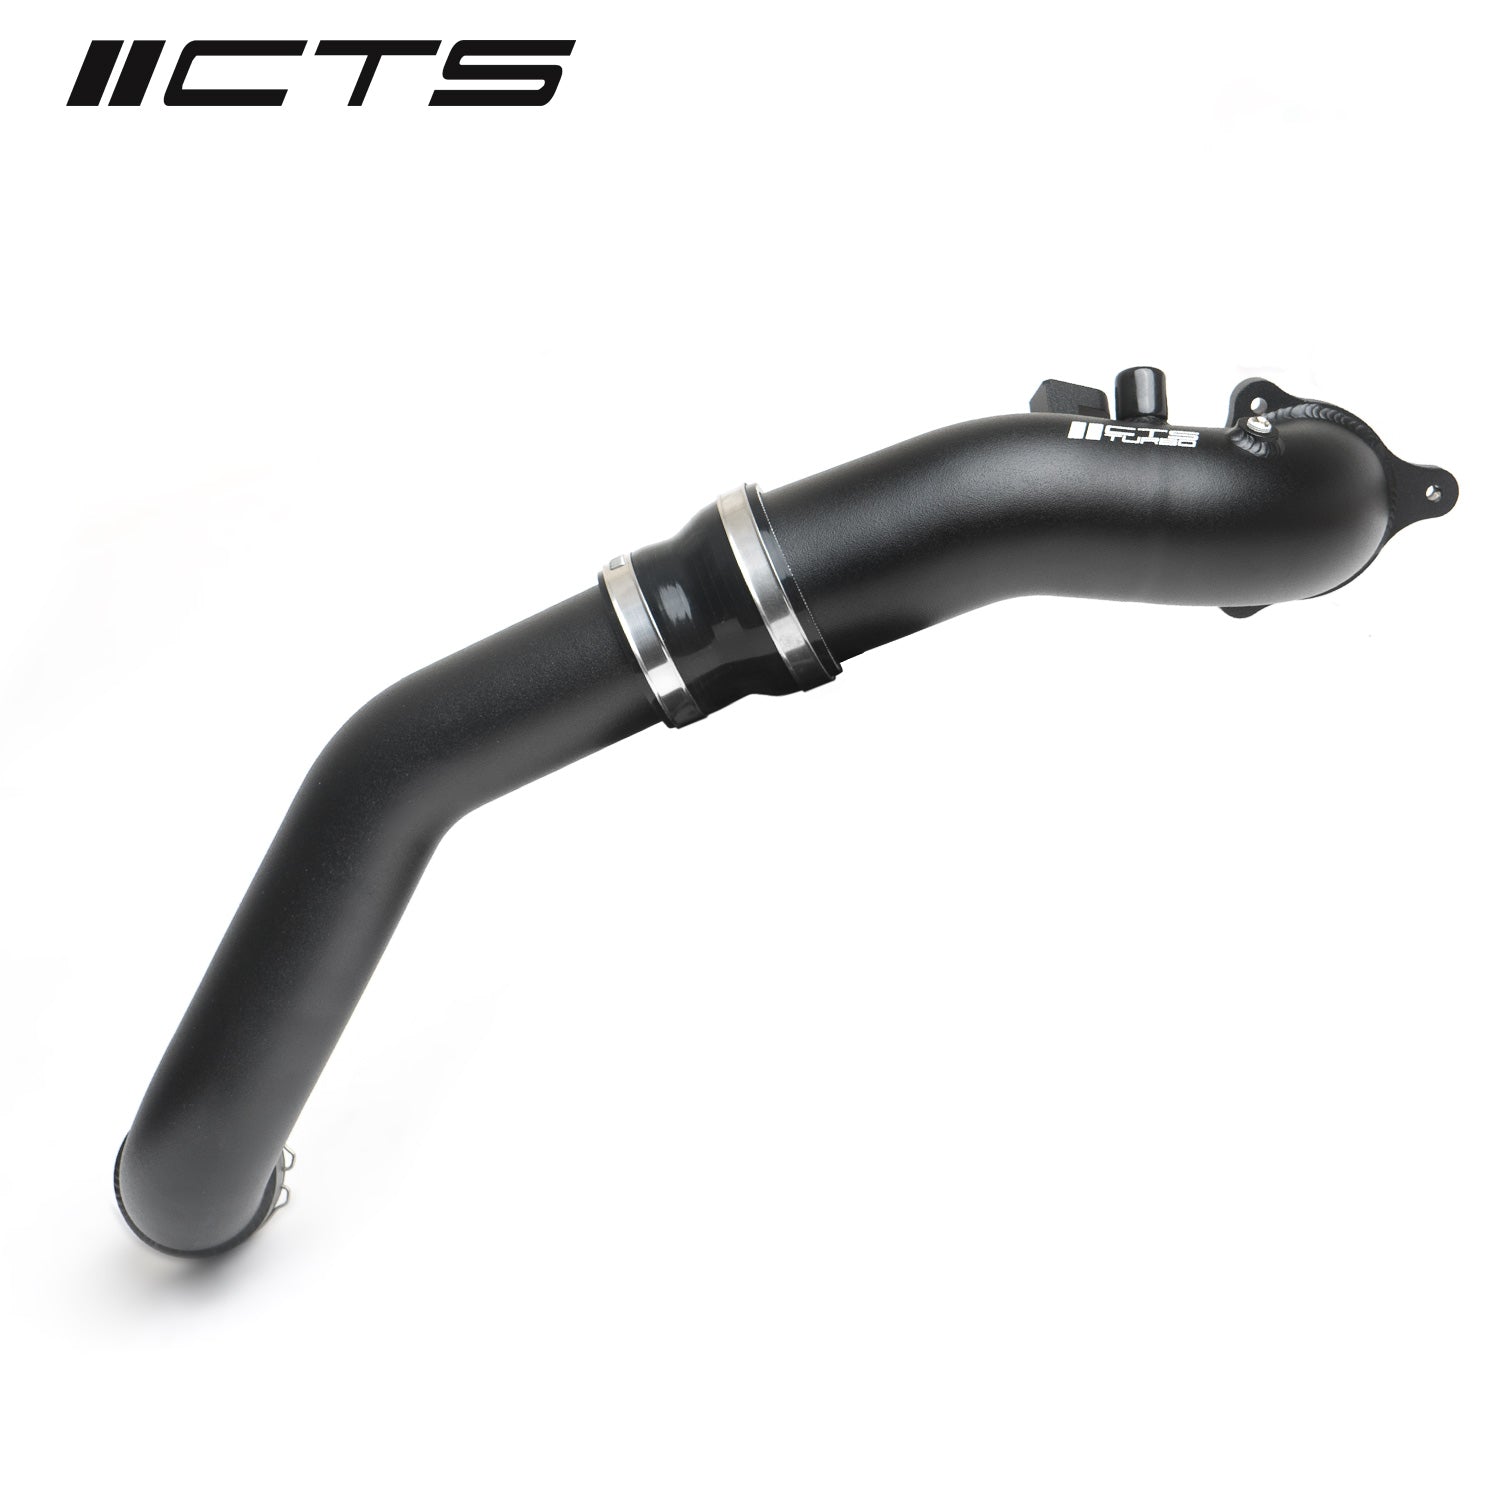 CTS TURBO CHARGE PIPE UPGRADE KIT 2016-2019 BMW B58 M140I, M240I, M340I, M440I, 540I, 740I, X3 & X4 F20, F22, F30, F32, G30, G11, G12, G01, G02 - 0